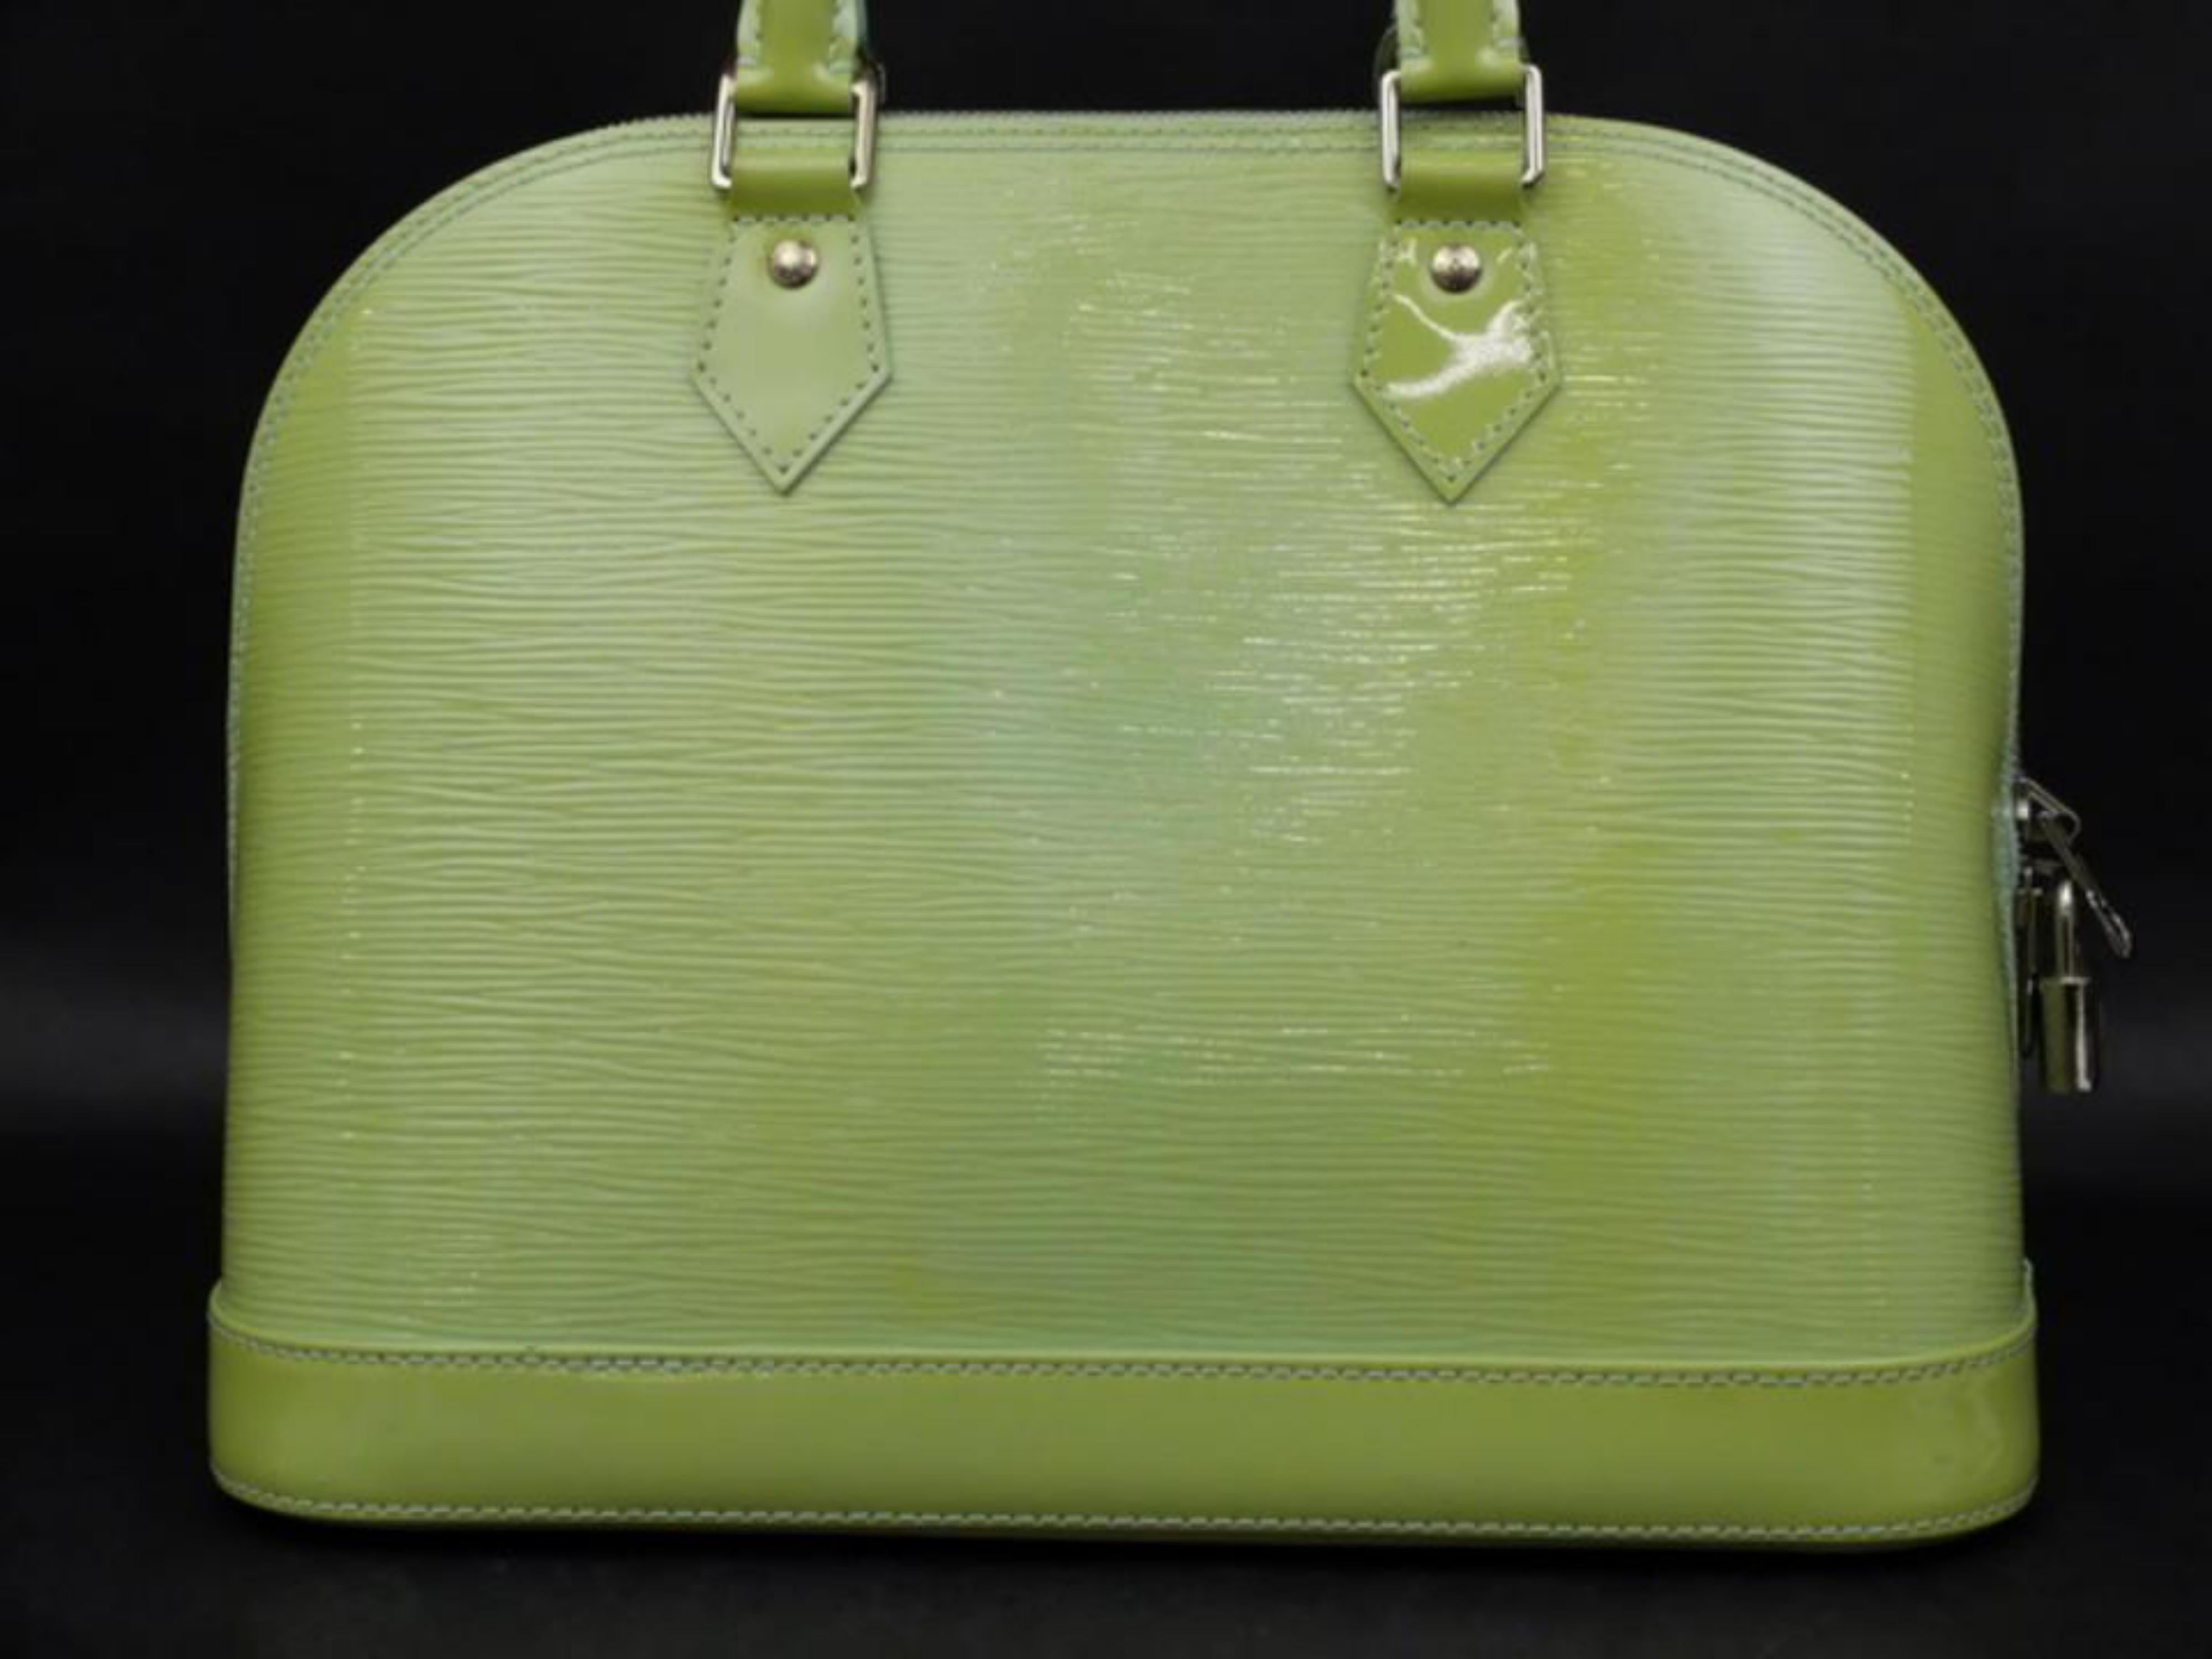 Louis Vuitton Alma Amande Pm 232546 Green Patent Leather Satchel In Good Condition For Sale In Forest Hills, NY